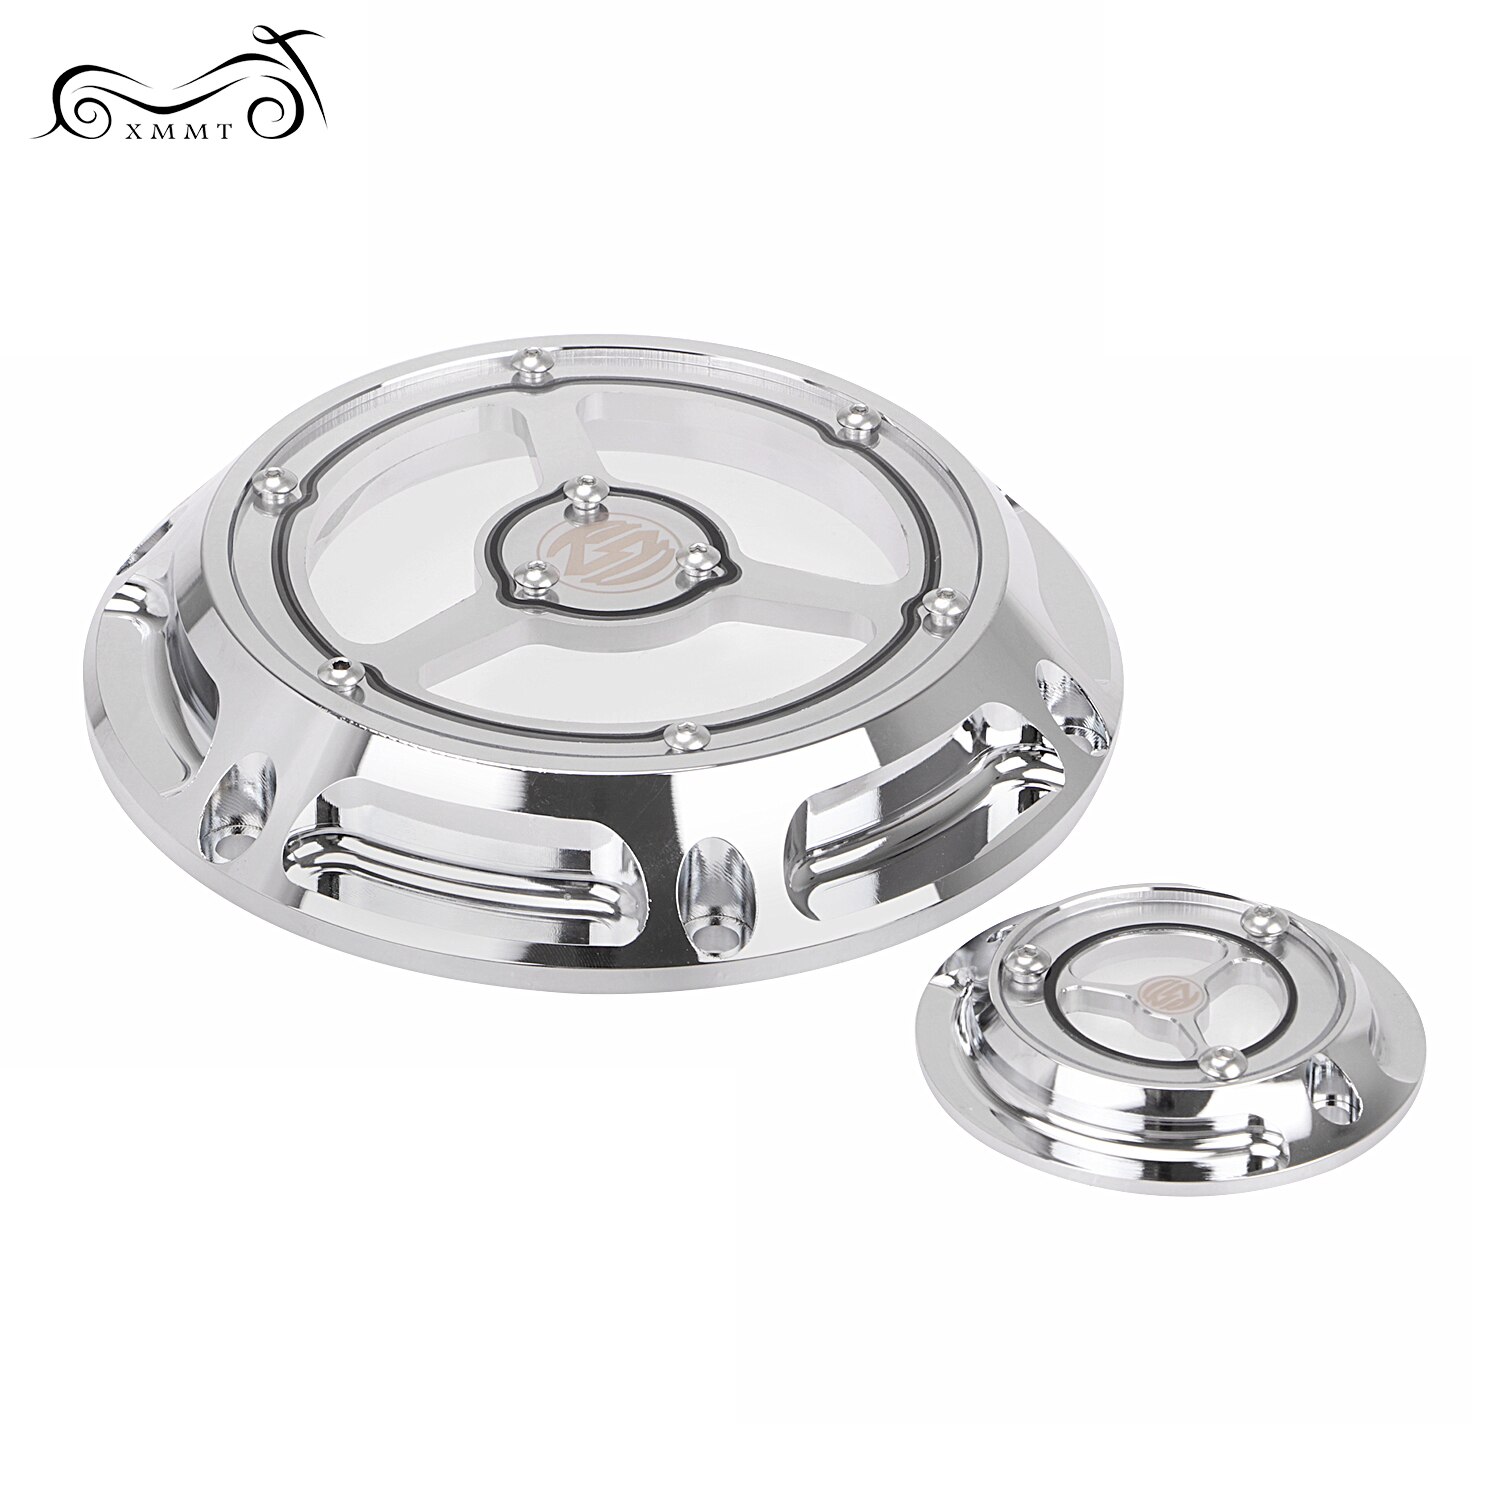 Derby Cover Engine Timing Timer Covers 6 Gaten Cnc Chrome Aluminium Voor Harley Sportster Xl Xr 2004 2005